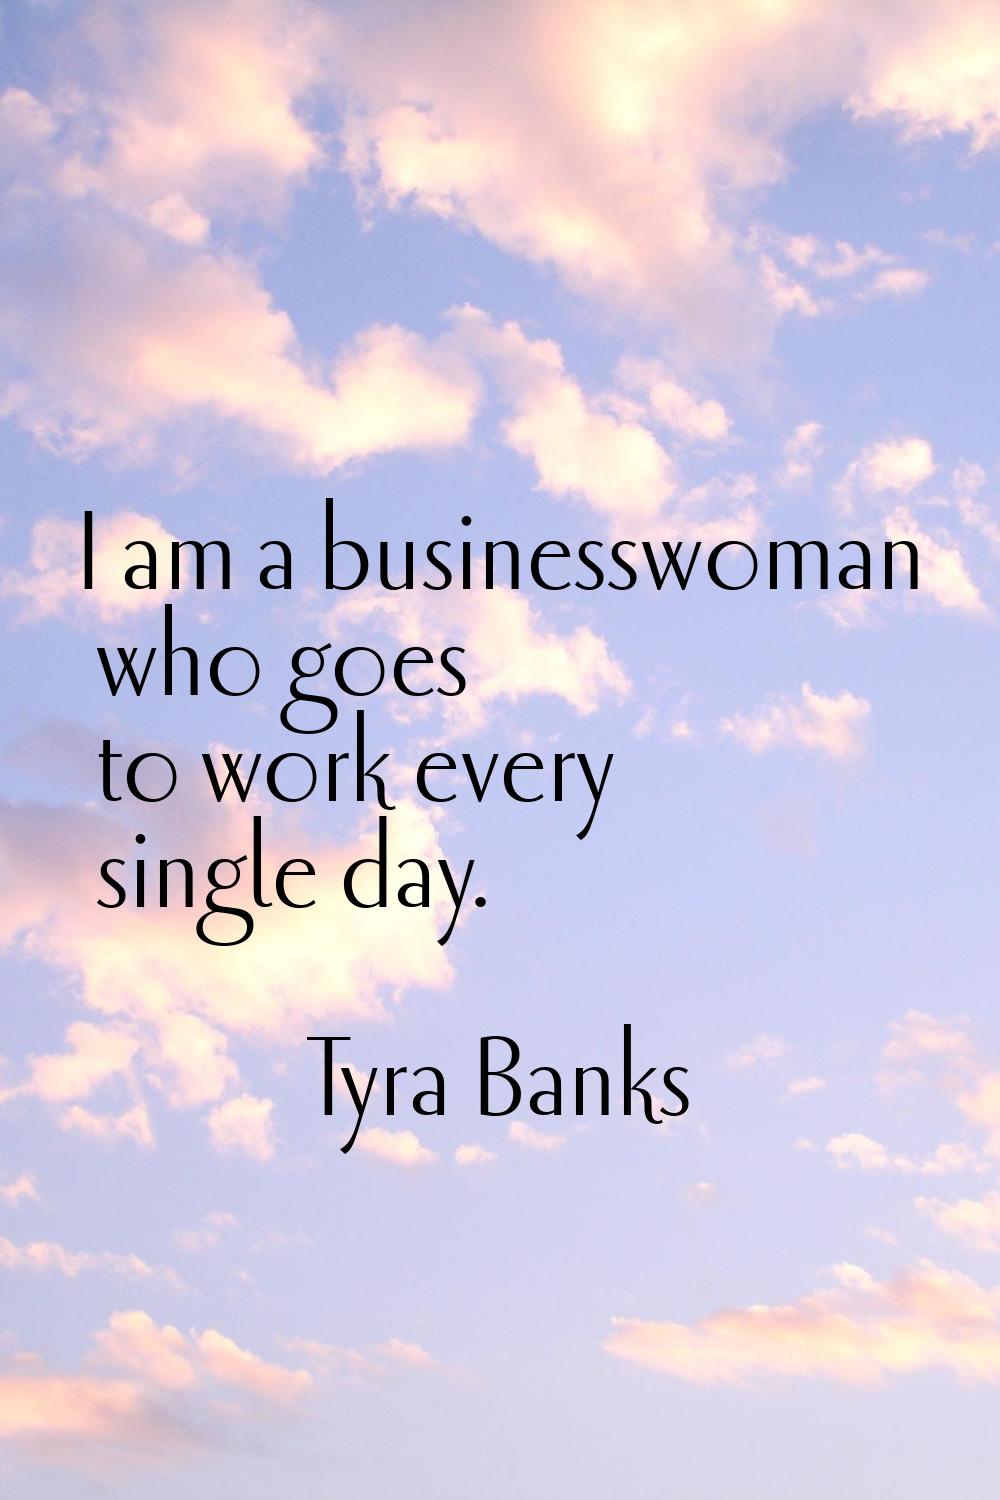 I am a businesswoman who goes to work every single day.